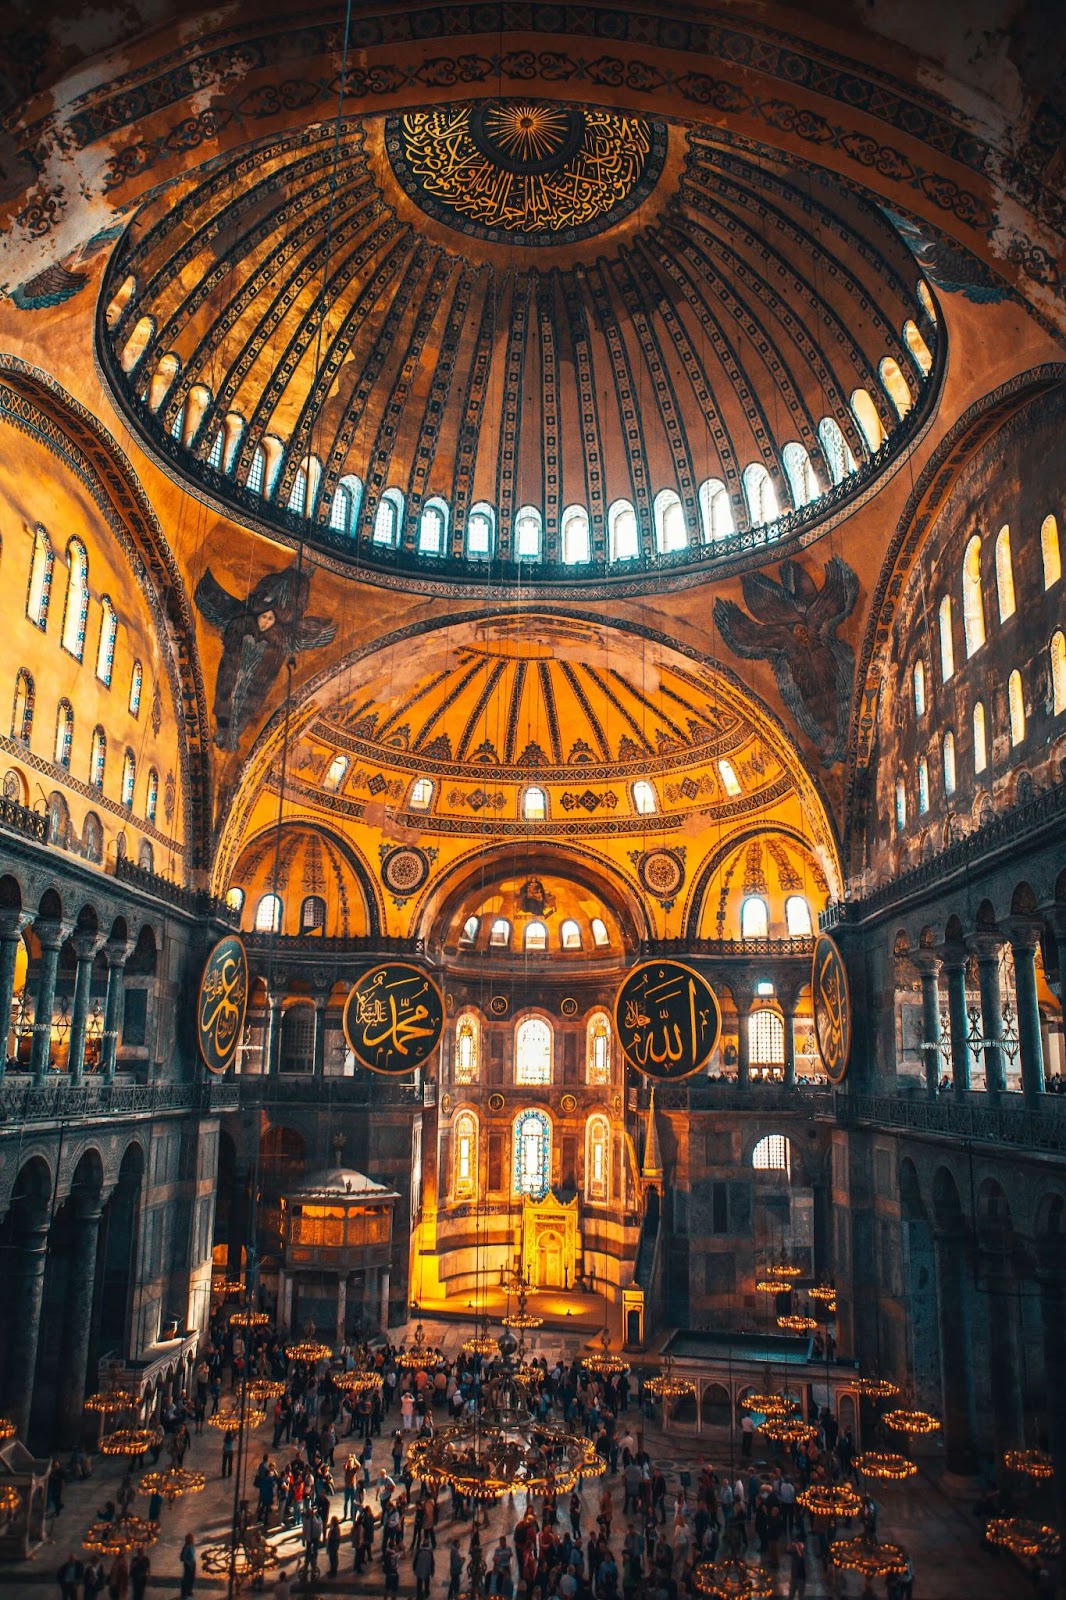 2 days in Istanbul itinerary, the vast hall of the Hagia Sophia lit up in the evening with large crowds admiring its architecture